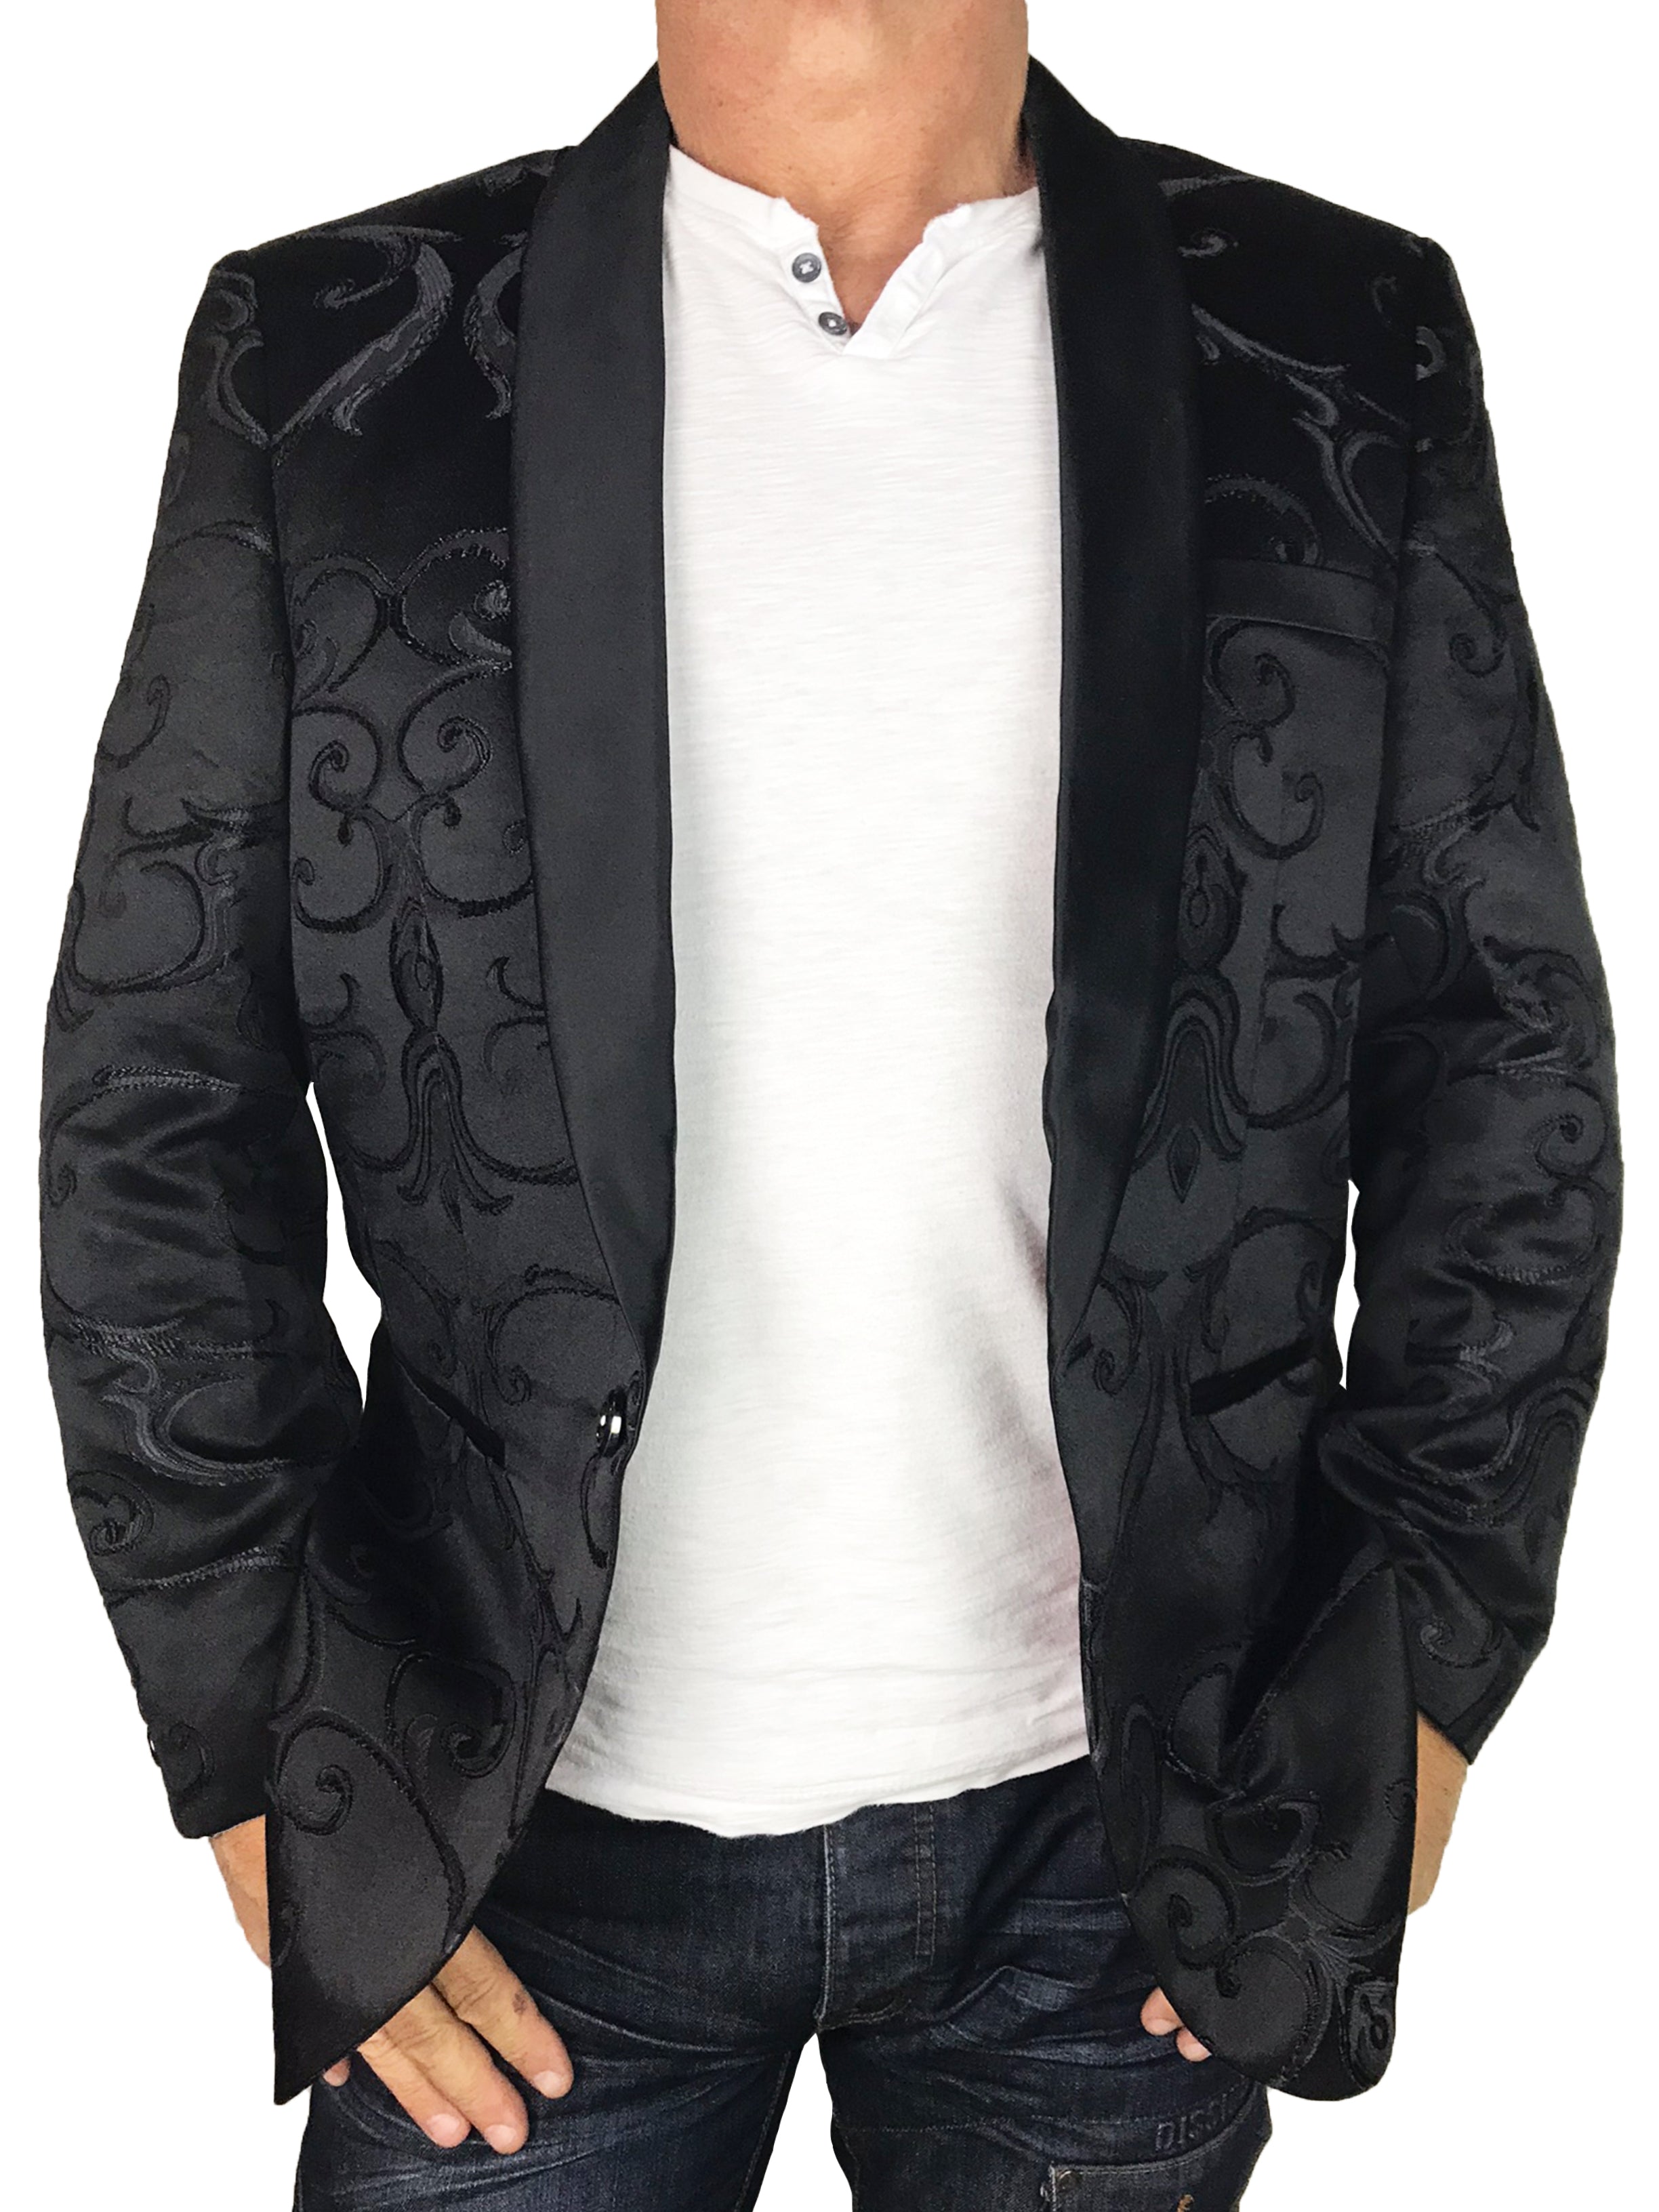 Fontaine Abstract Jacket - Black